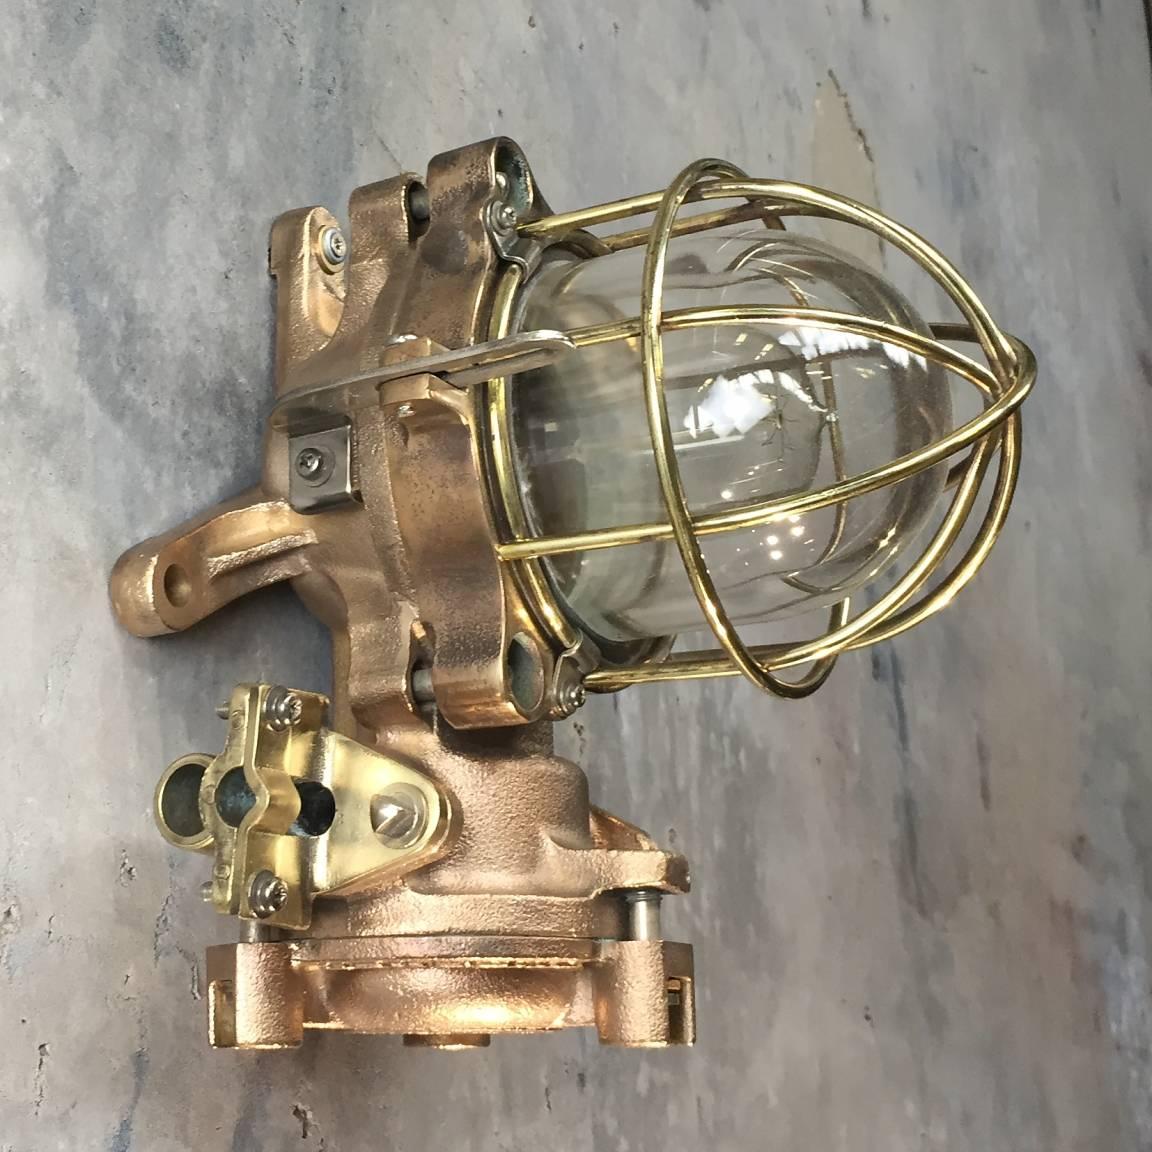 Flame proof copper and brass fitting.

Awesome engineering by Kokosha! Salvaged from a de-comissioned super tanker, fantastically over engineered.
Cast from copper with a brass cage and tempered glass dome. 

Great for ceilings or walls or we